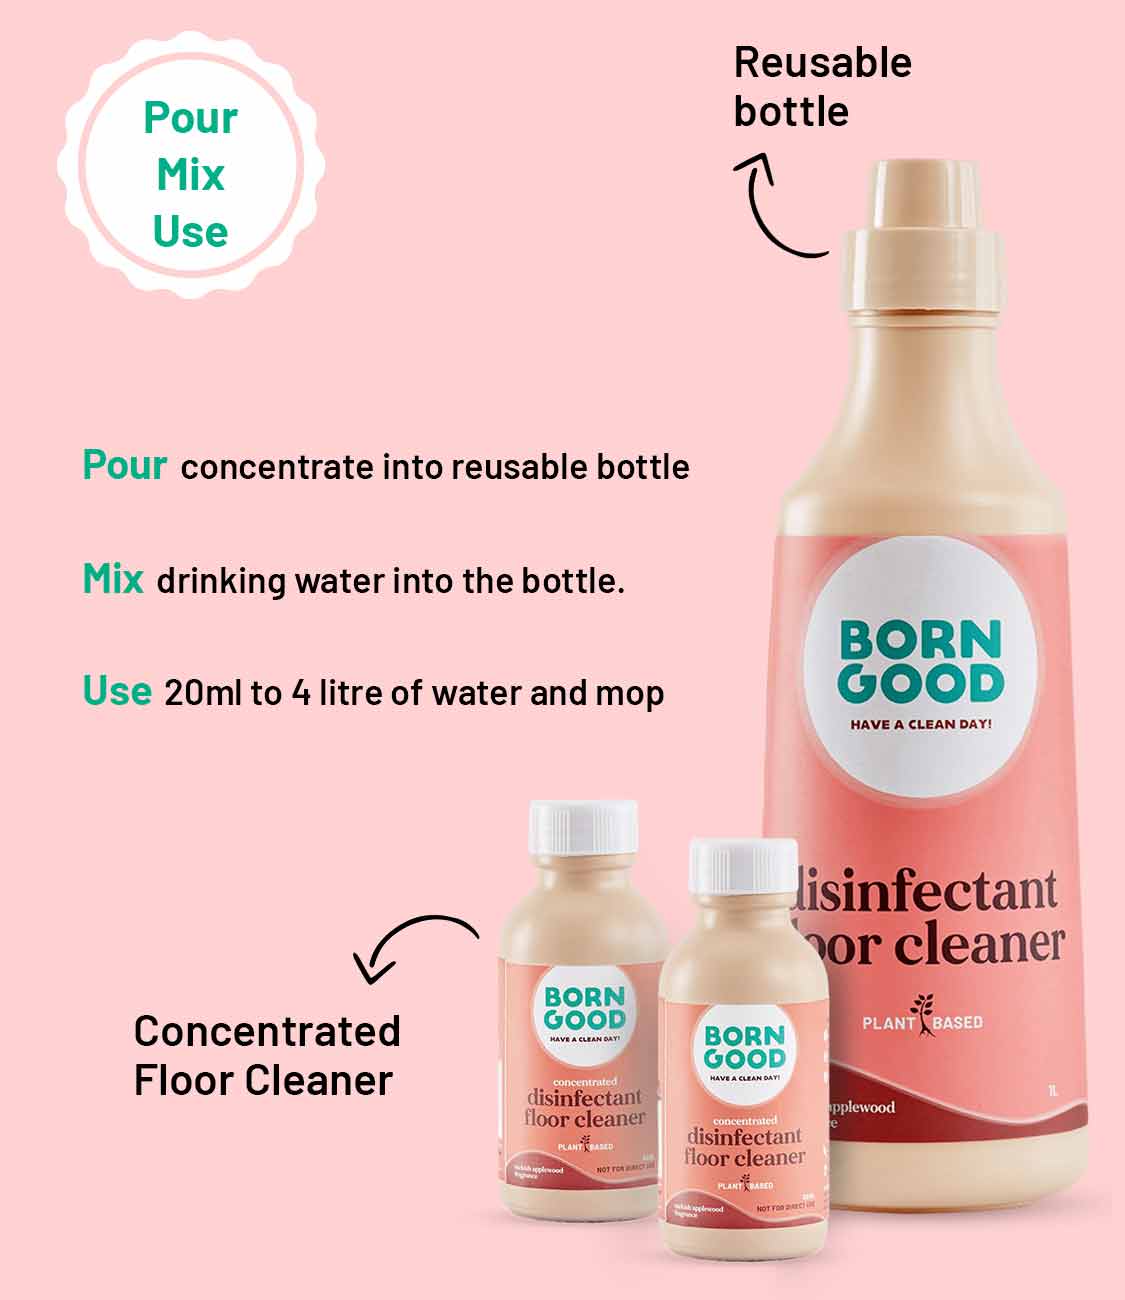 Born Good Plant-based Concentrated Floor Cleaner Kit (Makes 1 L)